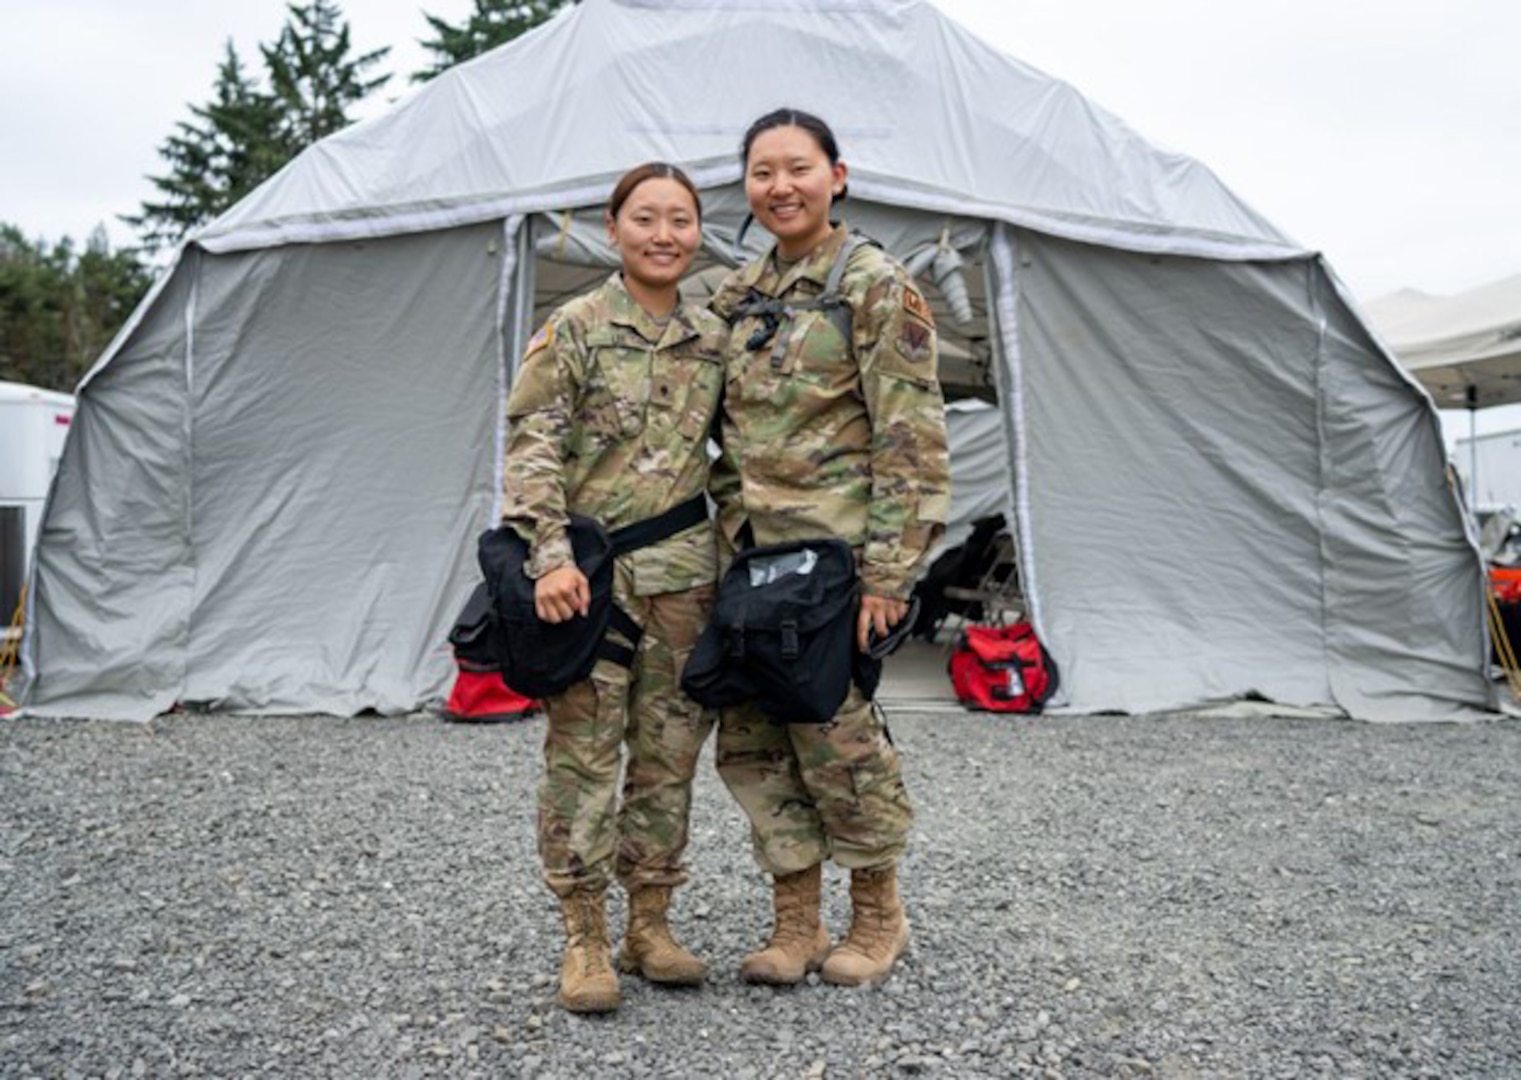 U.S. Army Spc. Jessica Lee, left, 928th Area Support Medical Company, Colorado Army National Guard, and U.S. Air Force Senior Airman Julie Lee, 140th Medical Group, Colorado Air National Guard ,participate in an external evaluation at Camp Rilea, Oregon, July 12, 2022. The sisters serve together in the Colorado National Guard’s Chemical, Biological, Radiological, Nuclear and high-yield explosive Enhanced Response Force Package.